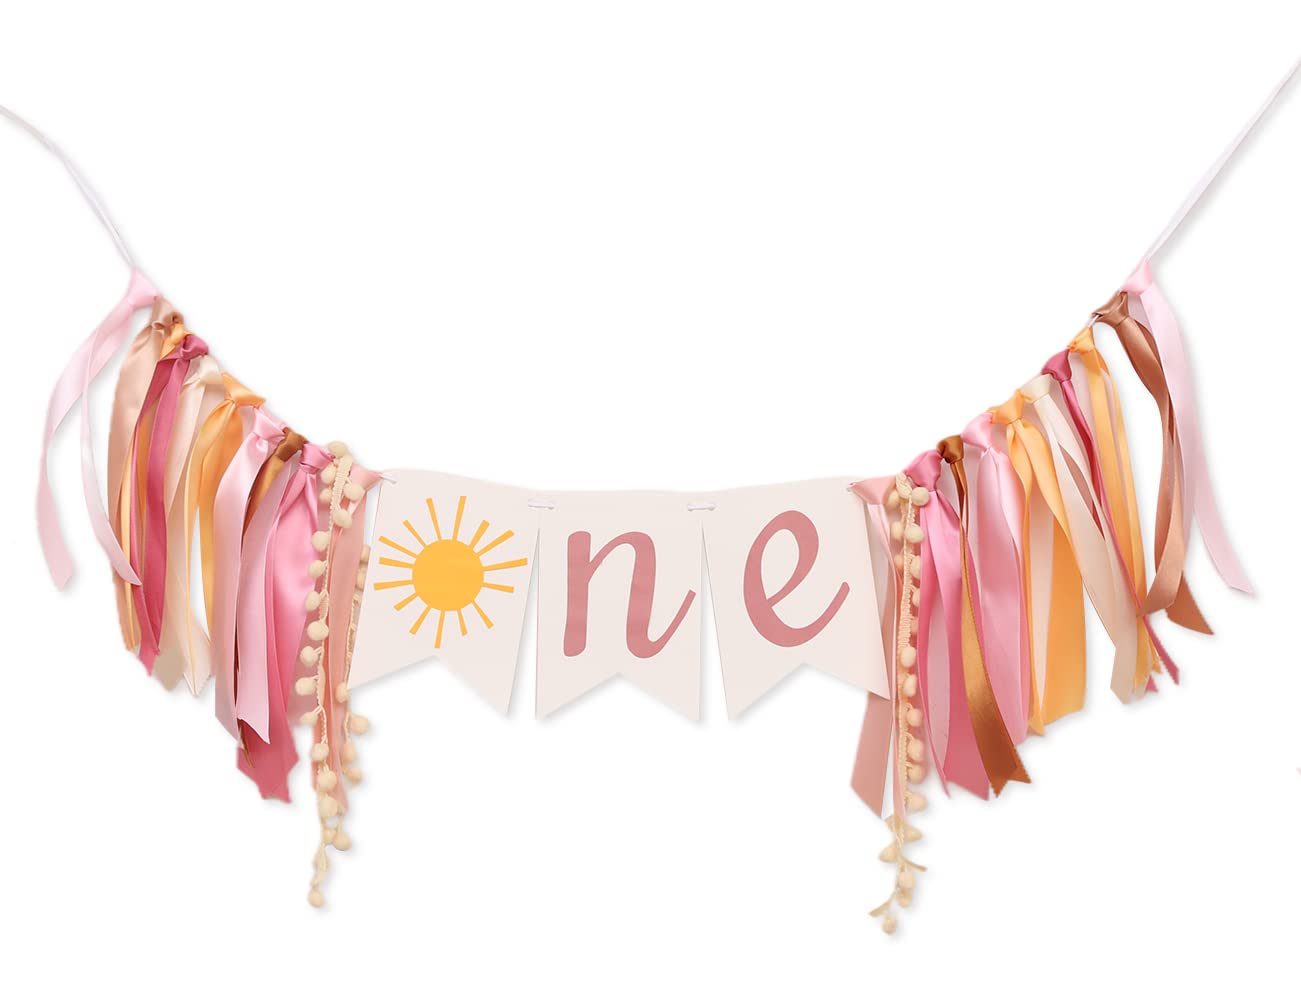 You Are My Sunshine High Chair Banner,Sun Themed First Birthday Party Decorations For Girl, Modern Sun One Garland For High Chair, Ribbon Tutu Skirt Baby Girl Shower Supplies